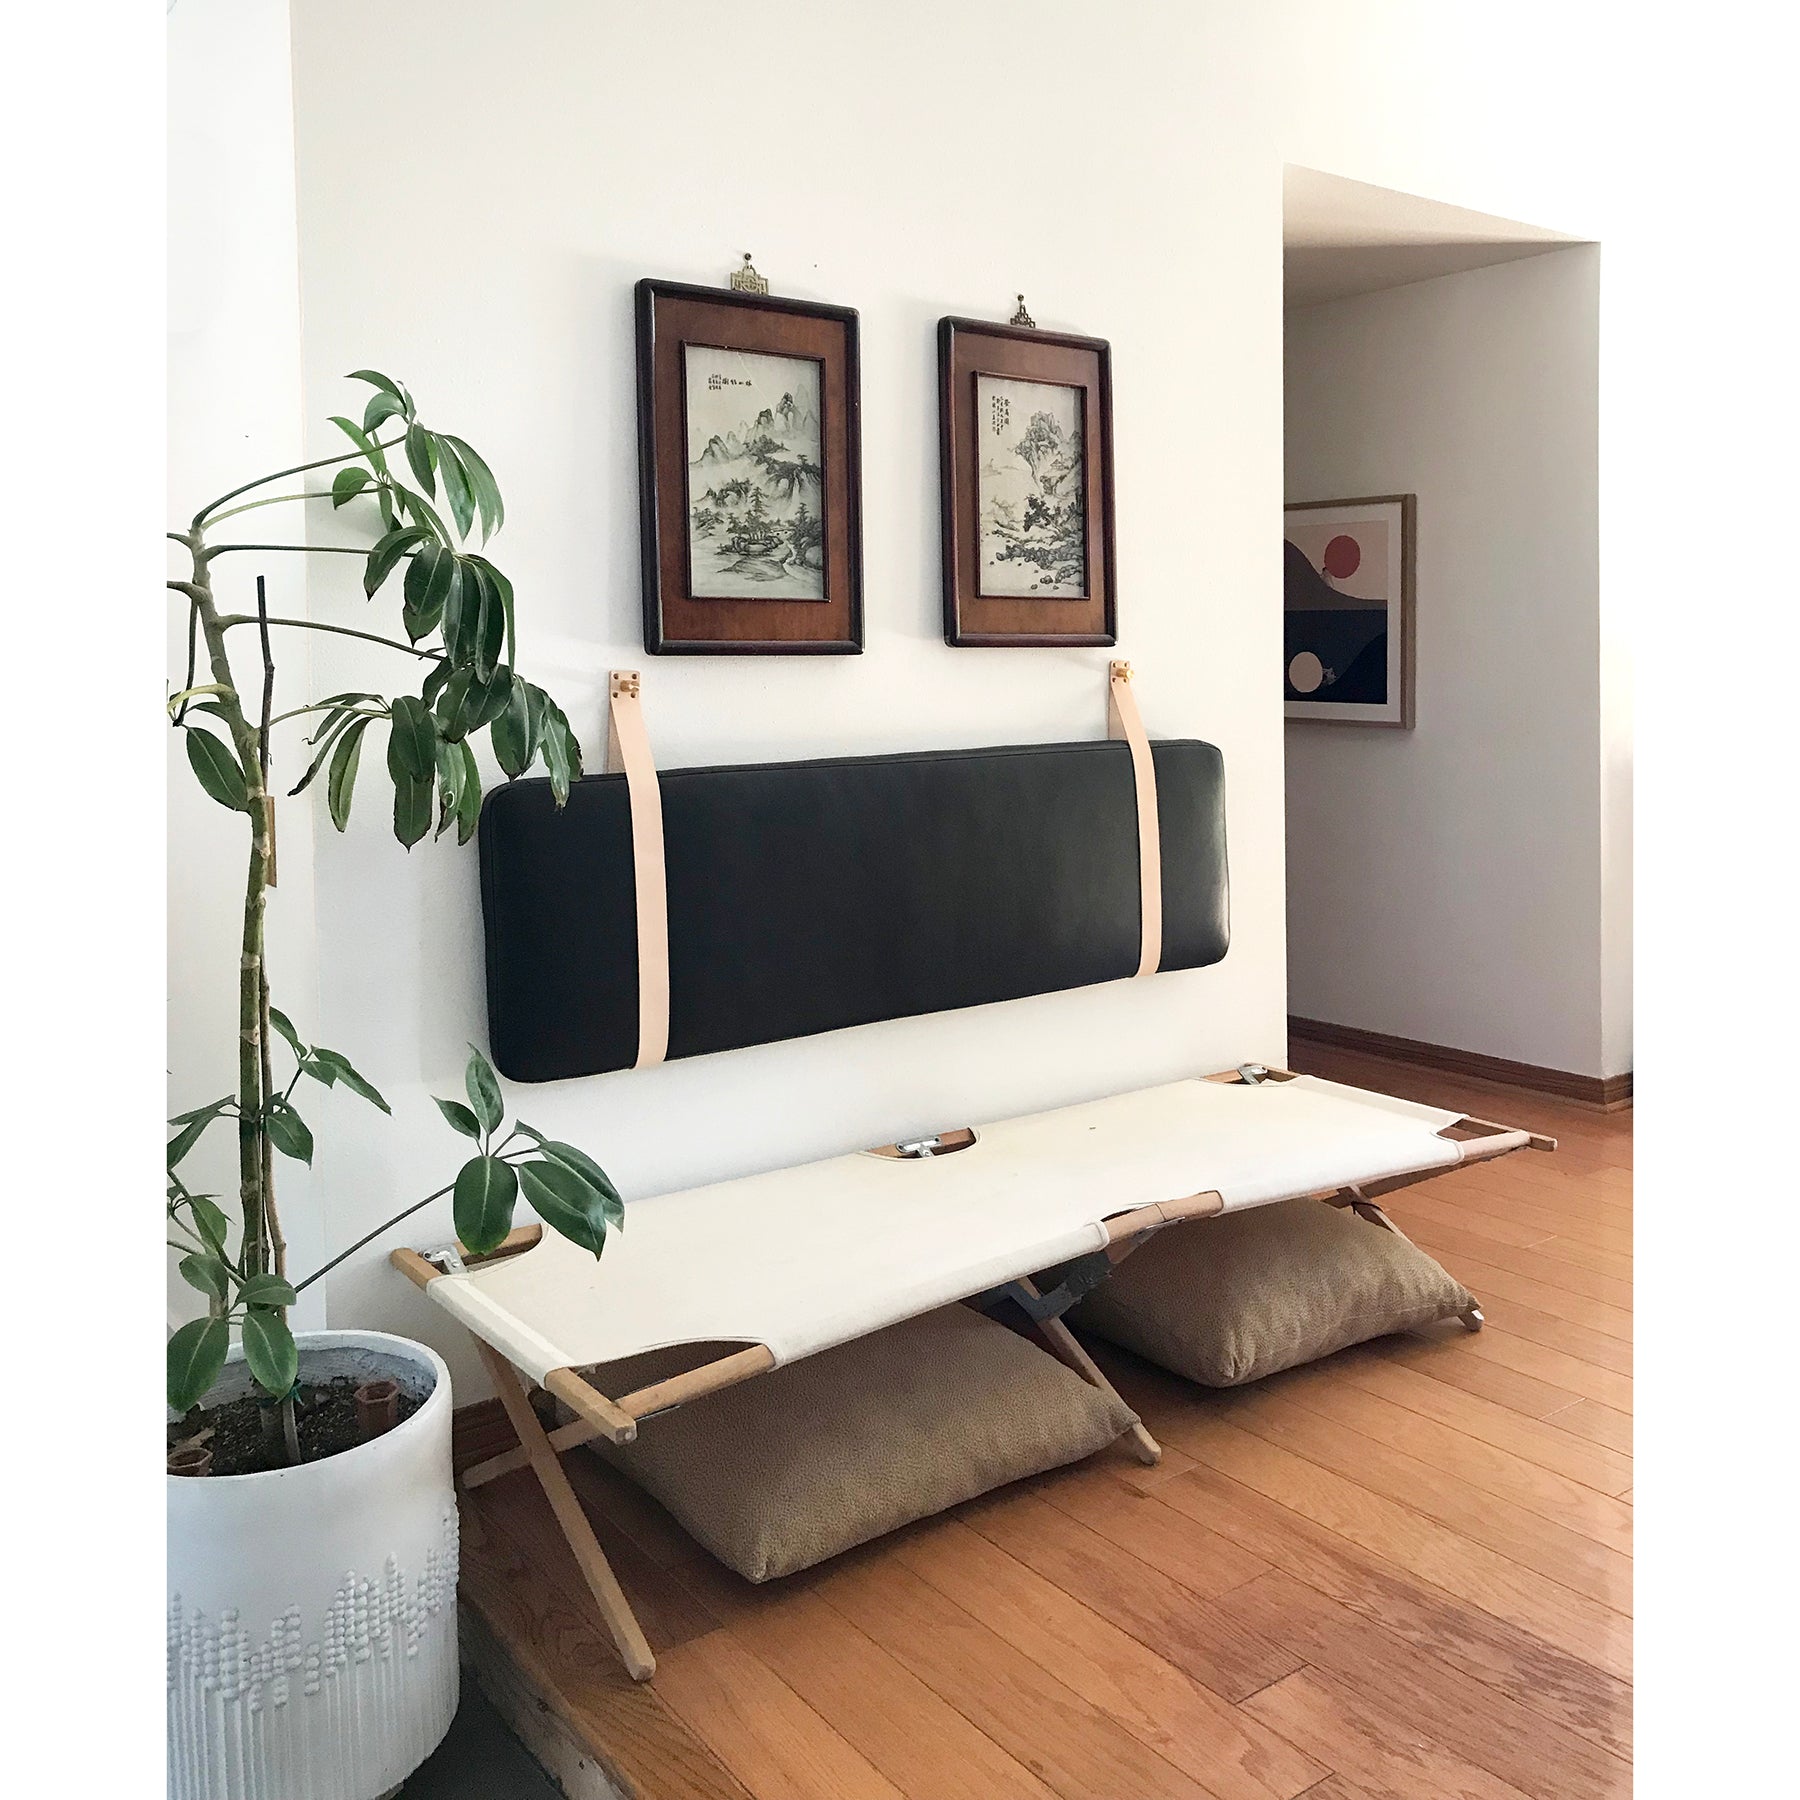 Three quarter view of styled entryway with plant, art and Black leather headboard cushion used as a backrest mounted on a white wall with natural veg-tan leather straps above a cot.